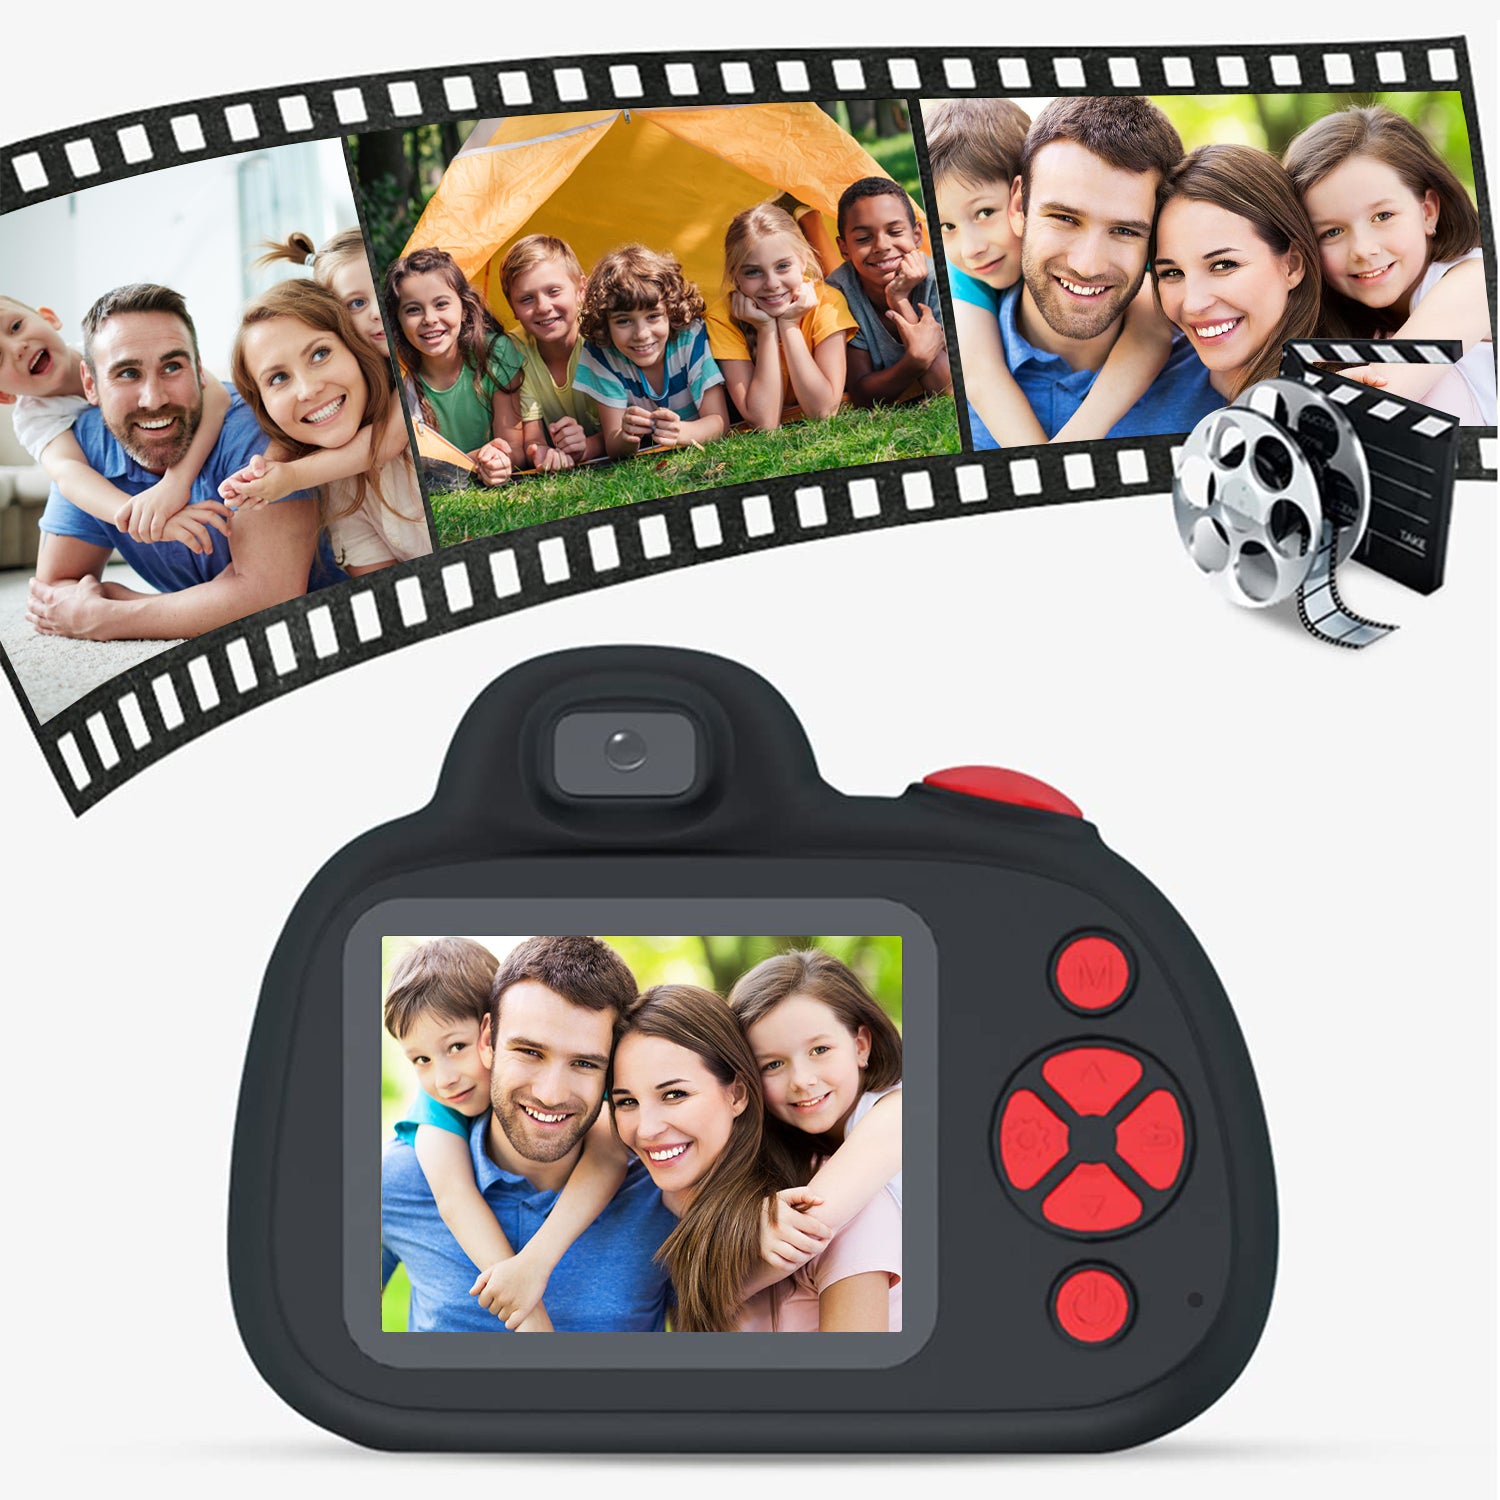 Kids Camera, Digital Camera for Kids, Toys for Girls Boys, Digital Camera with 2.4 Inch IPS Screen